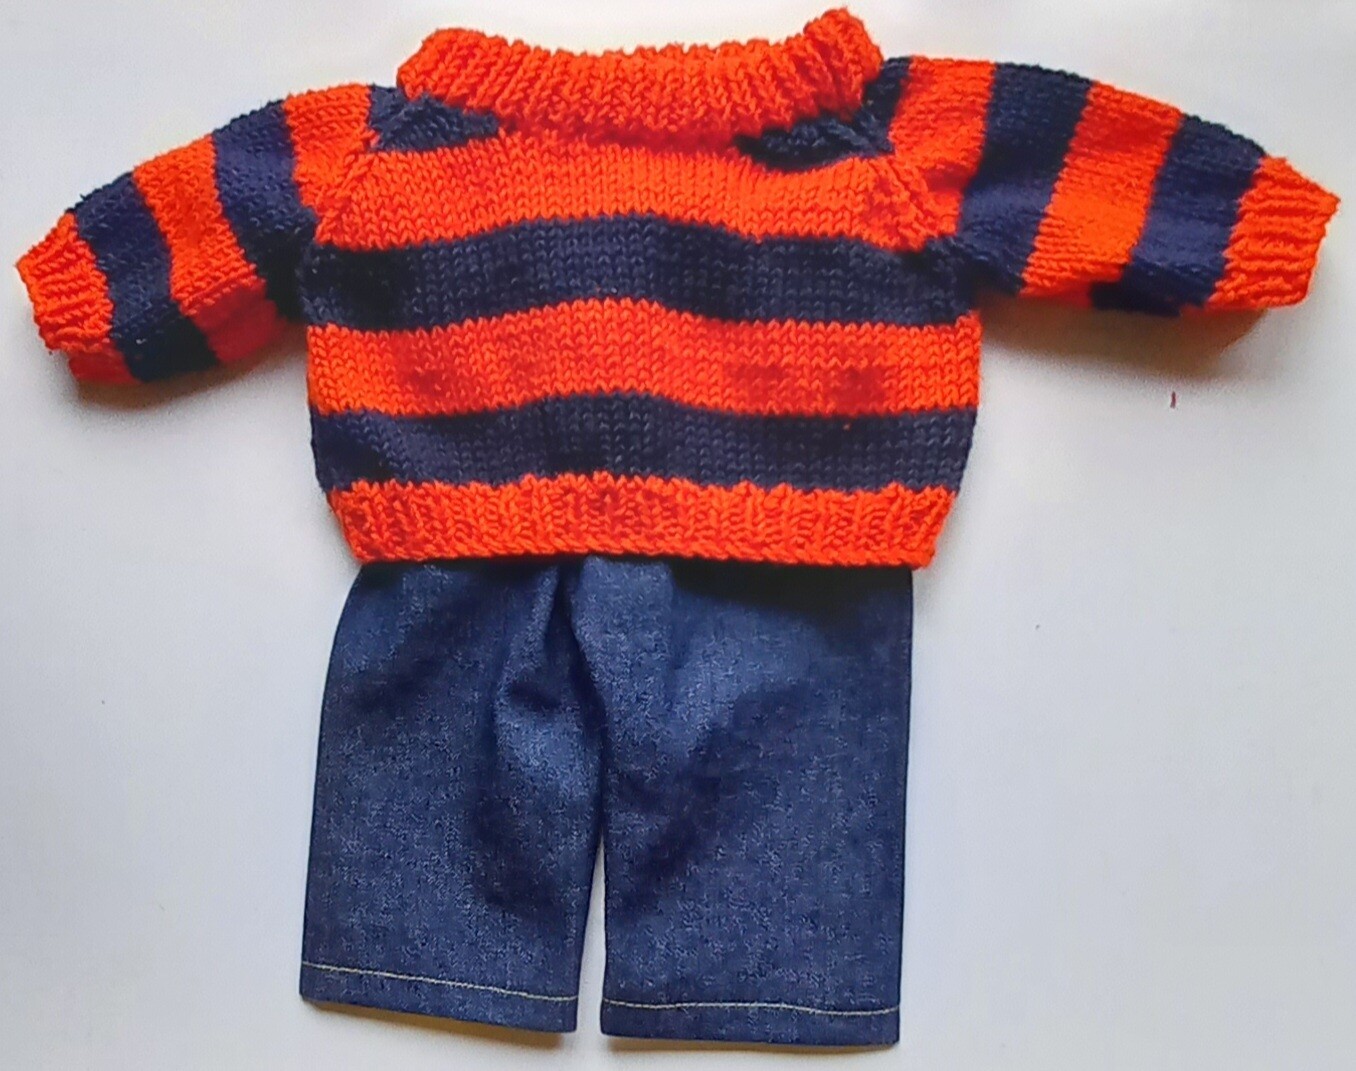 Outfit: Red and navy striped jumper and dark denim jeans for 46cm/18inch doll